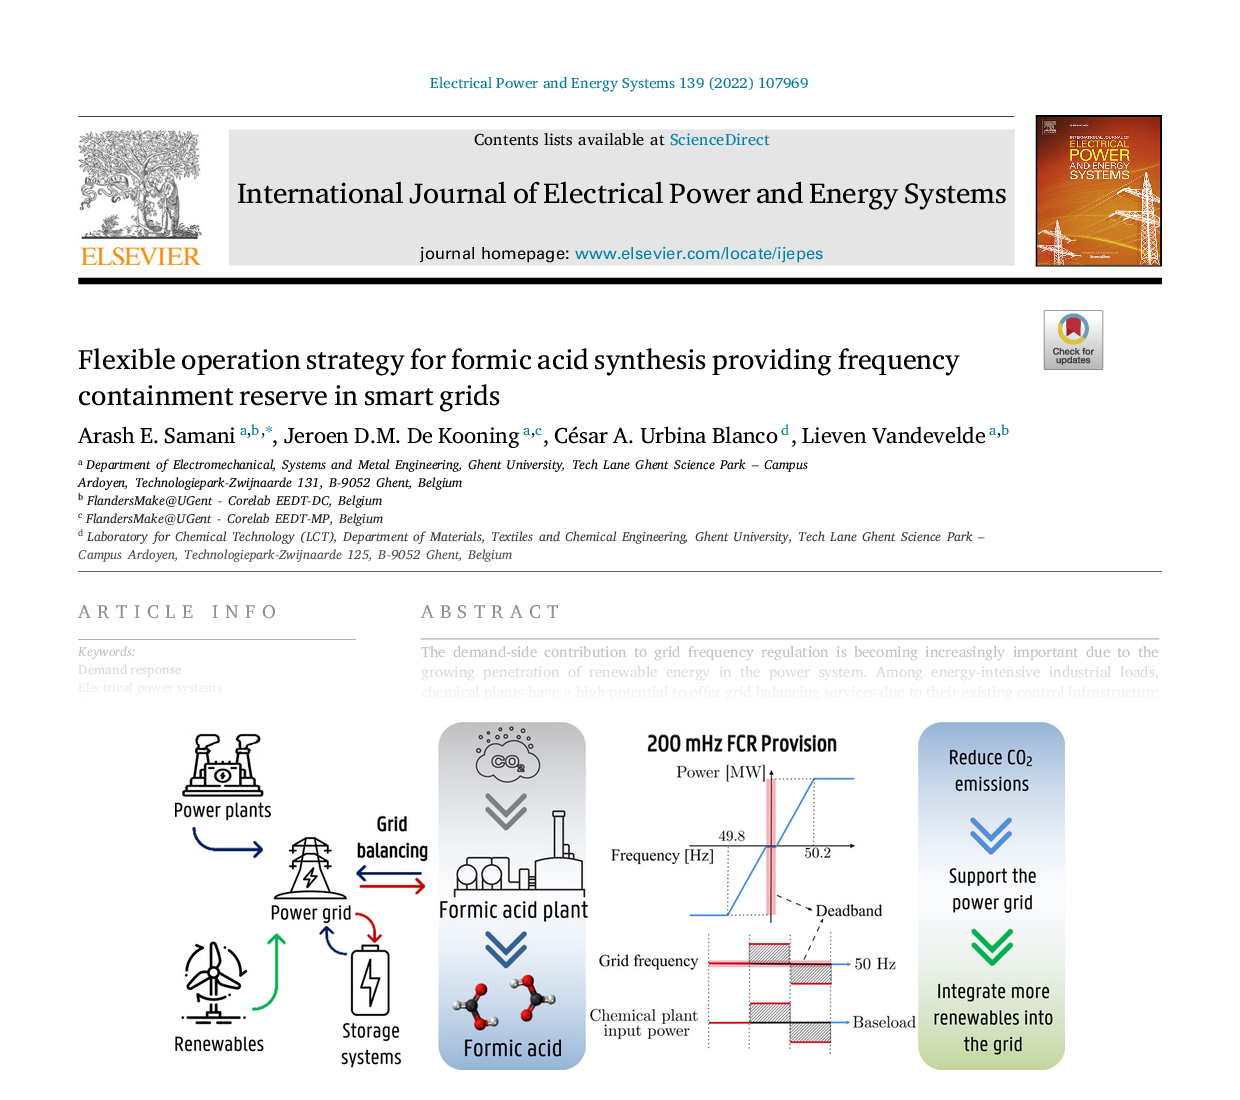 Flexible operation strategy for formic acid synthesis providing frequency containment reserve in smart grids